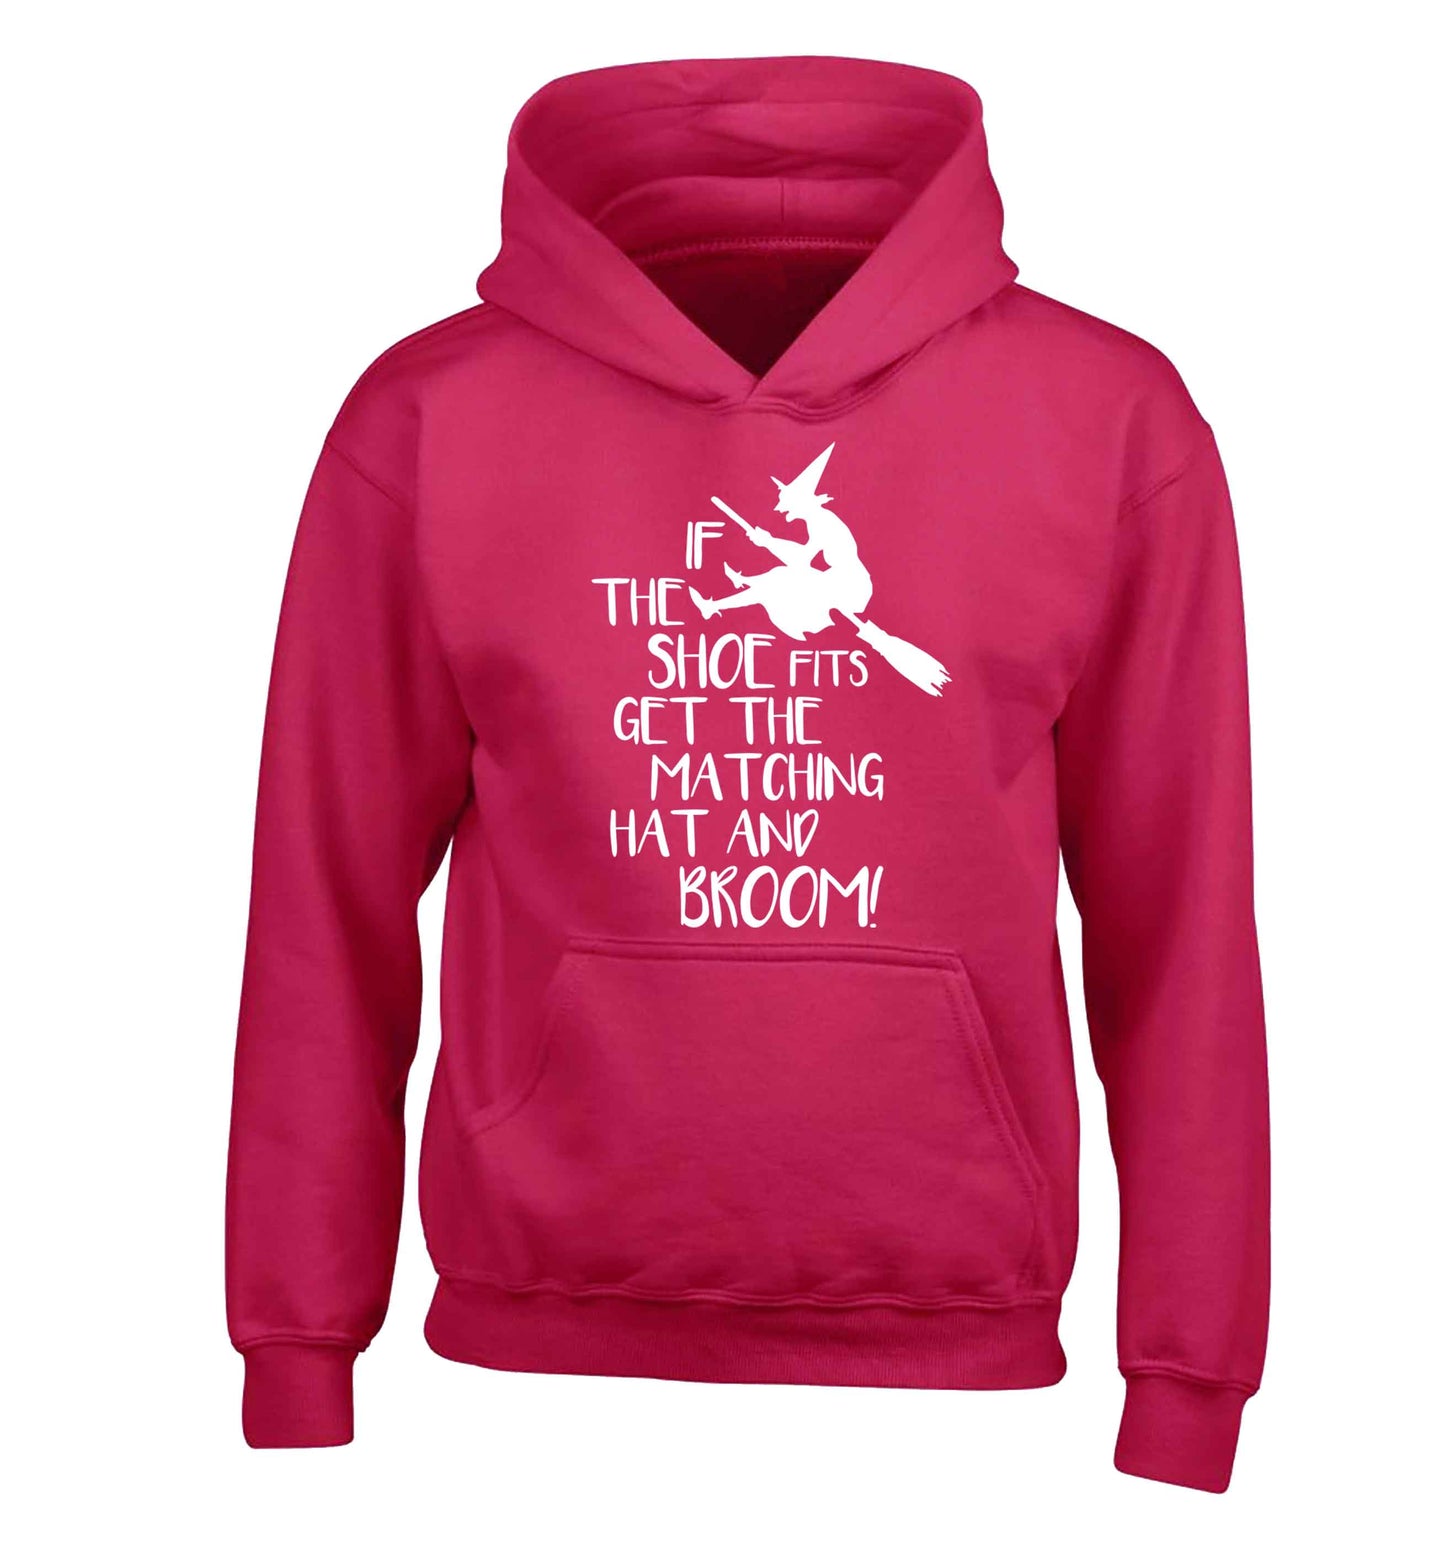 If the shoe fits get the matching hat and broom children's pink hoodie 12-13 Years